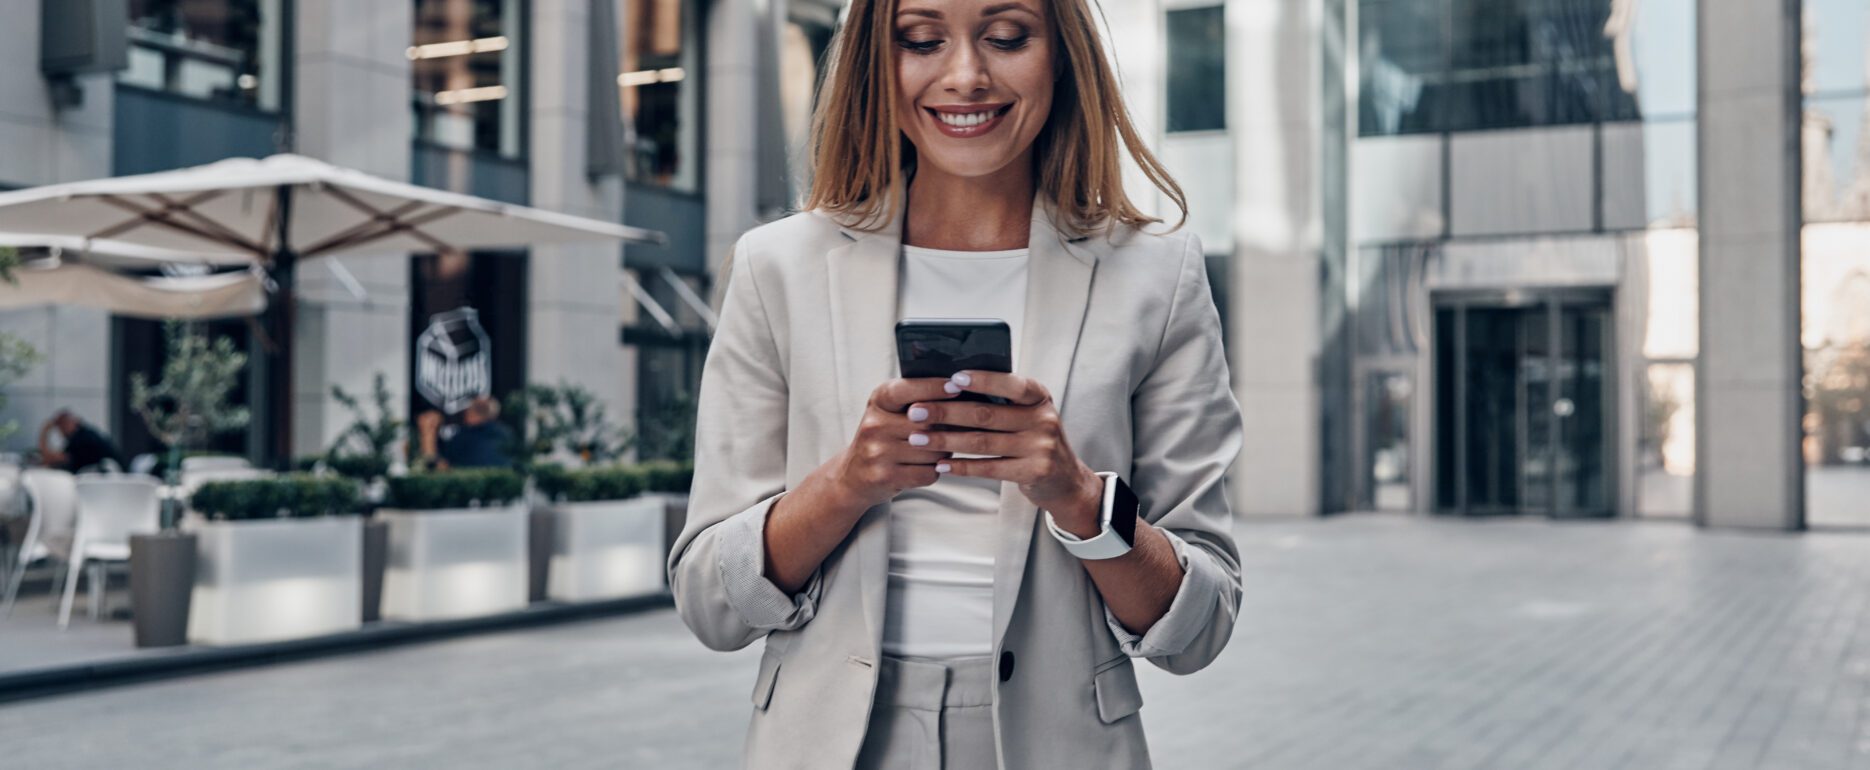 Woman in suit using smart phone and smiling while standing outdoors.